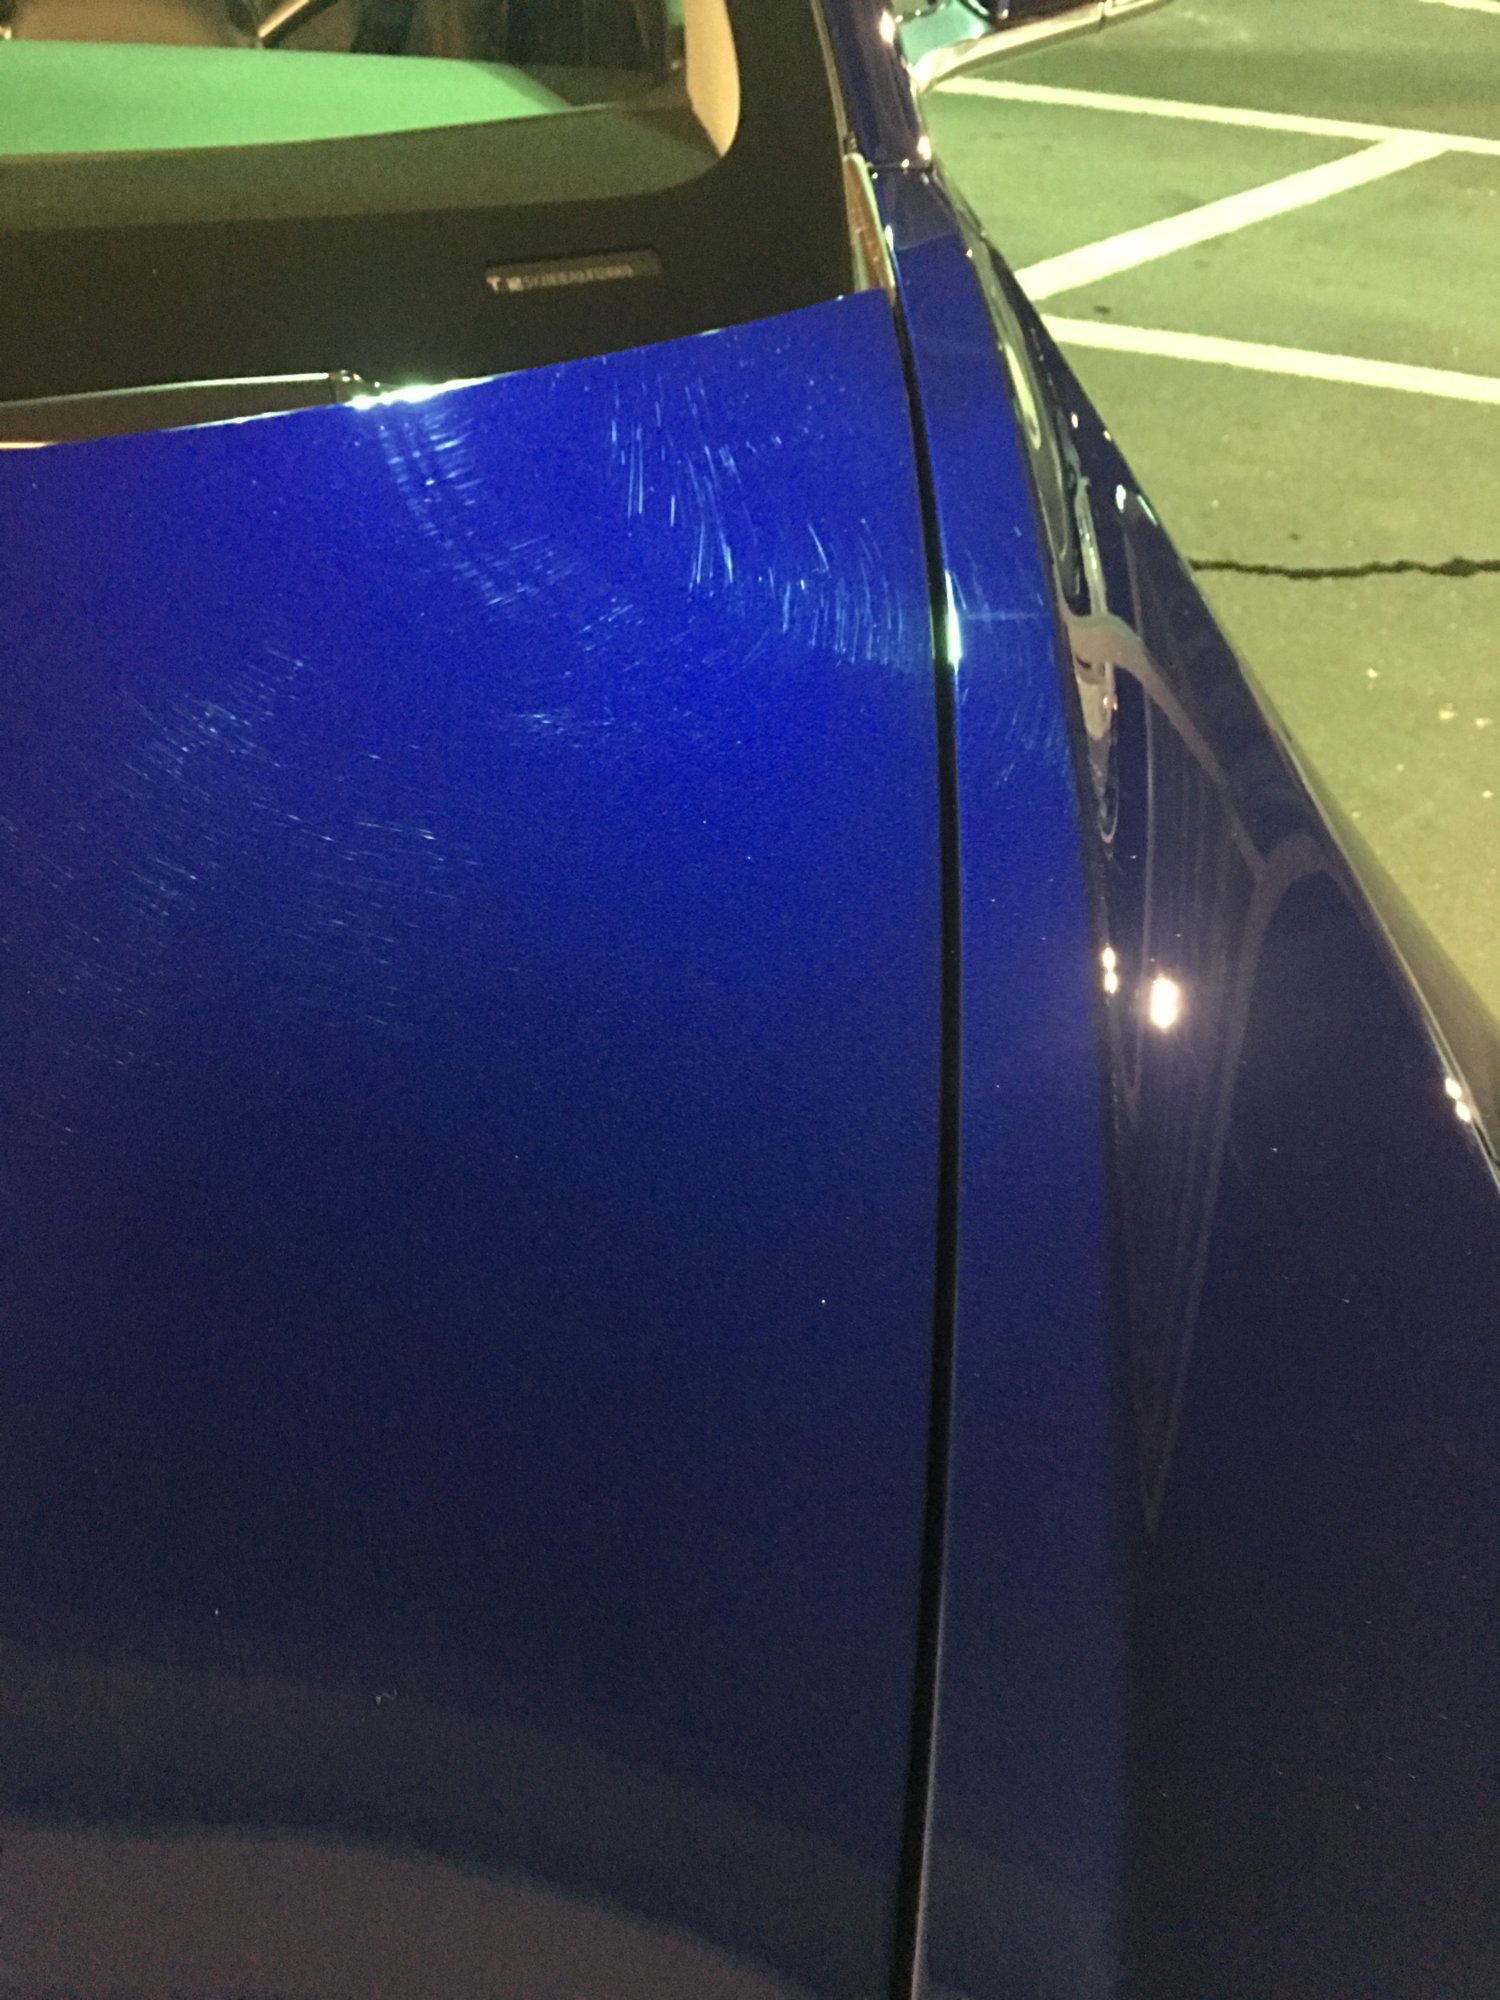 Declined my Model3 during delivery due to excessive paint swirls and now i  am stuck | Tesla Motors Club